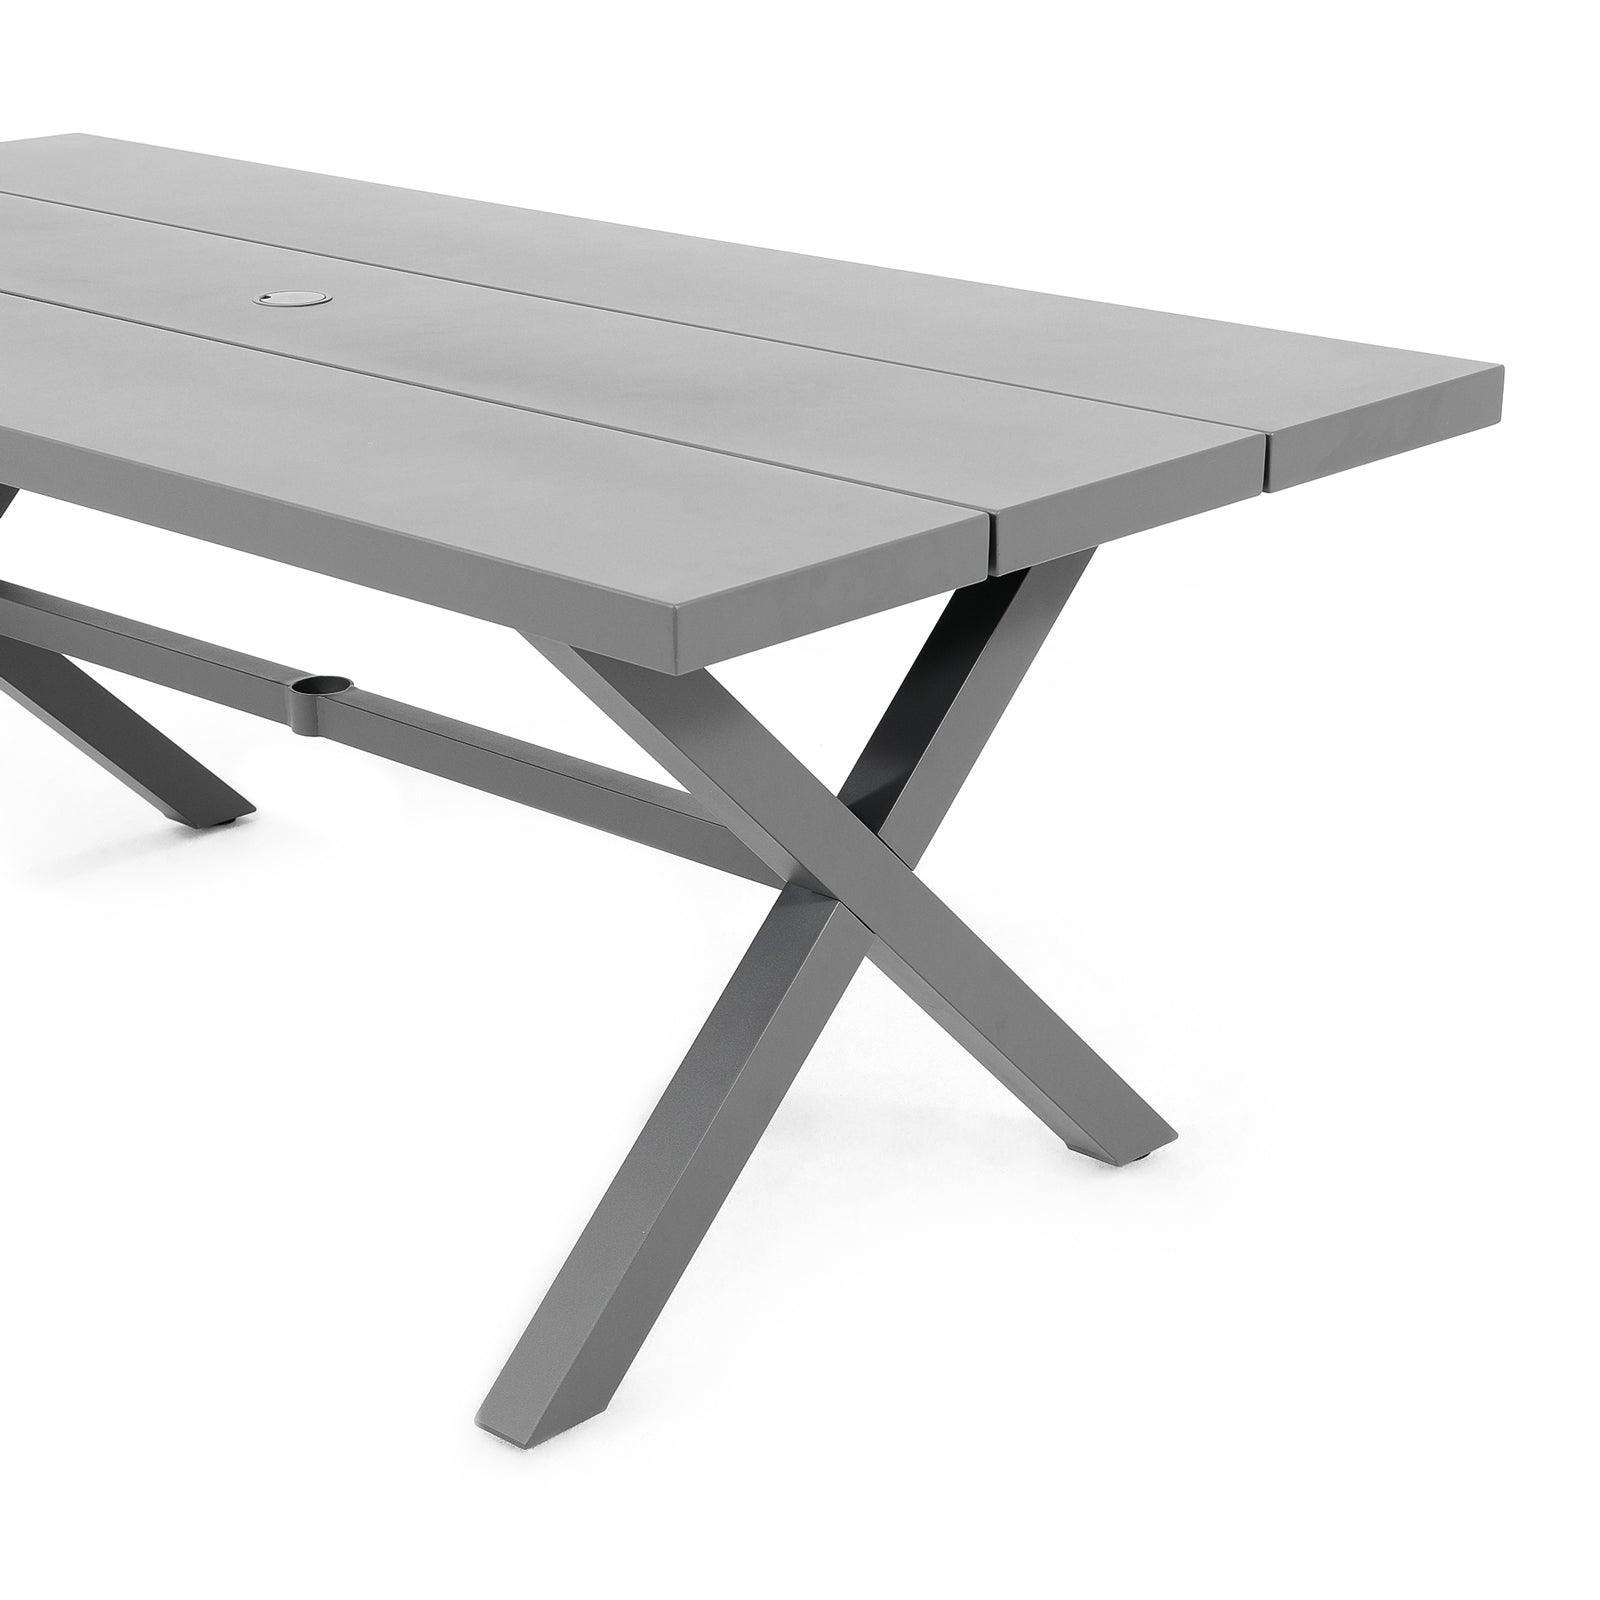 Comino dark grey X-shaped dining table with aluminum frame, table detail - Jardina Furniture#color_Black